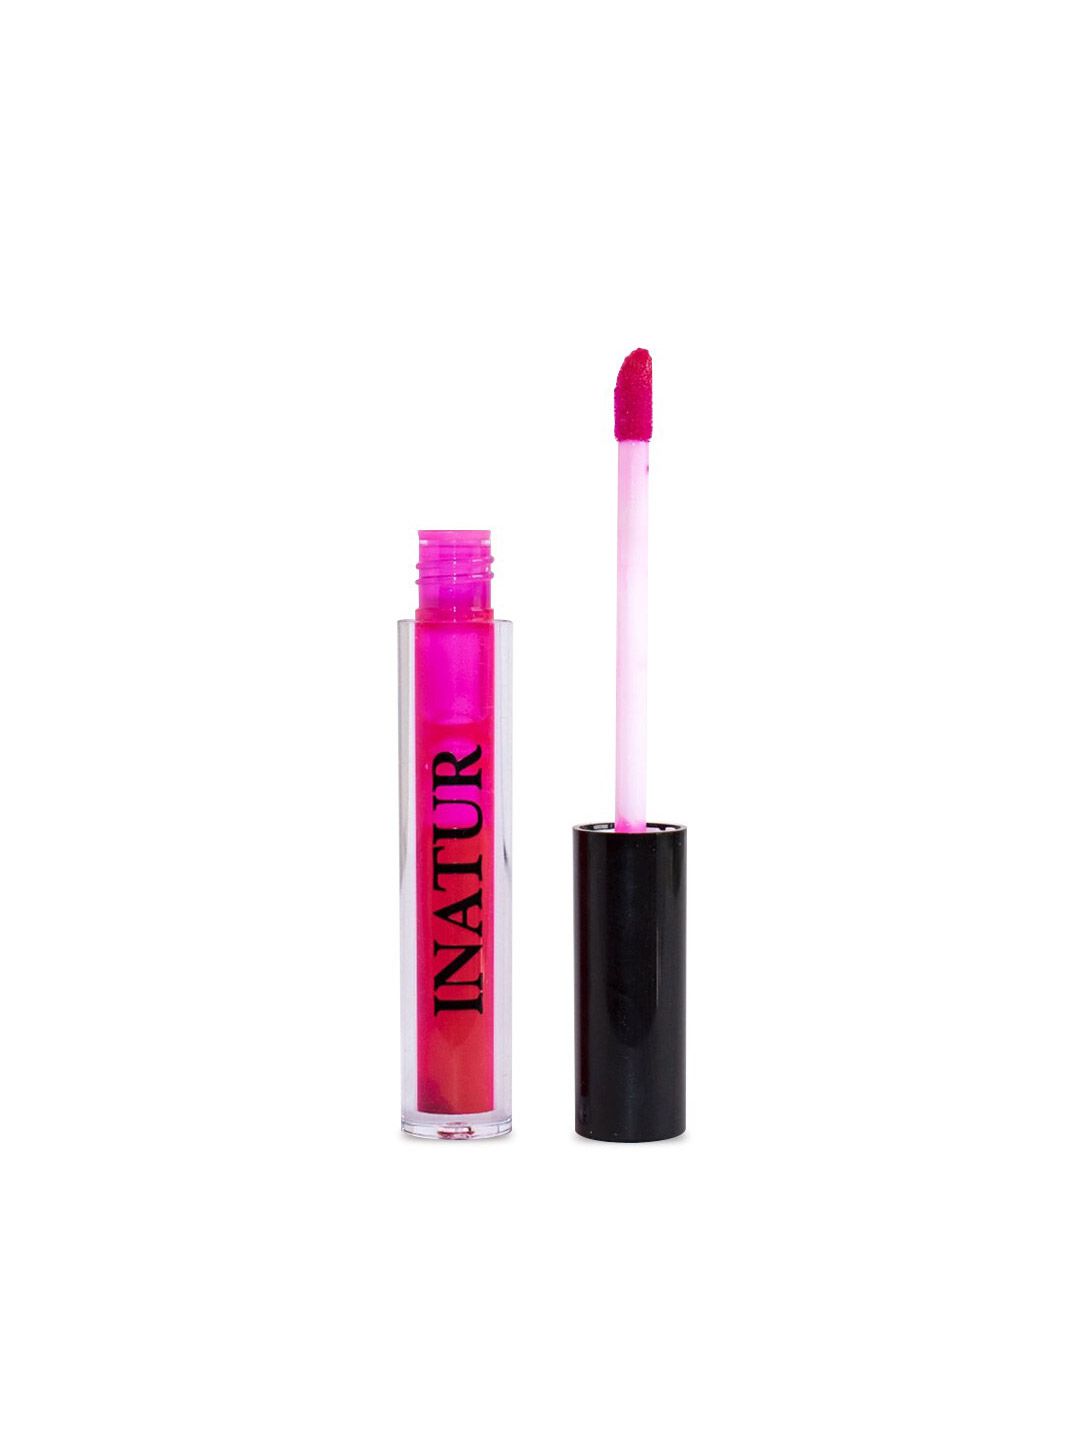 Inatur Lip Gloss - Glam Pink 1.6 ml Price in India